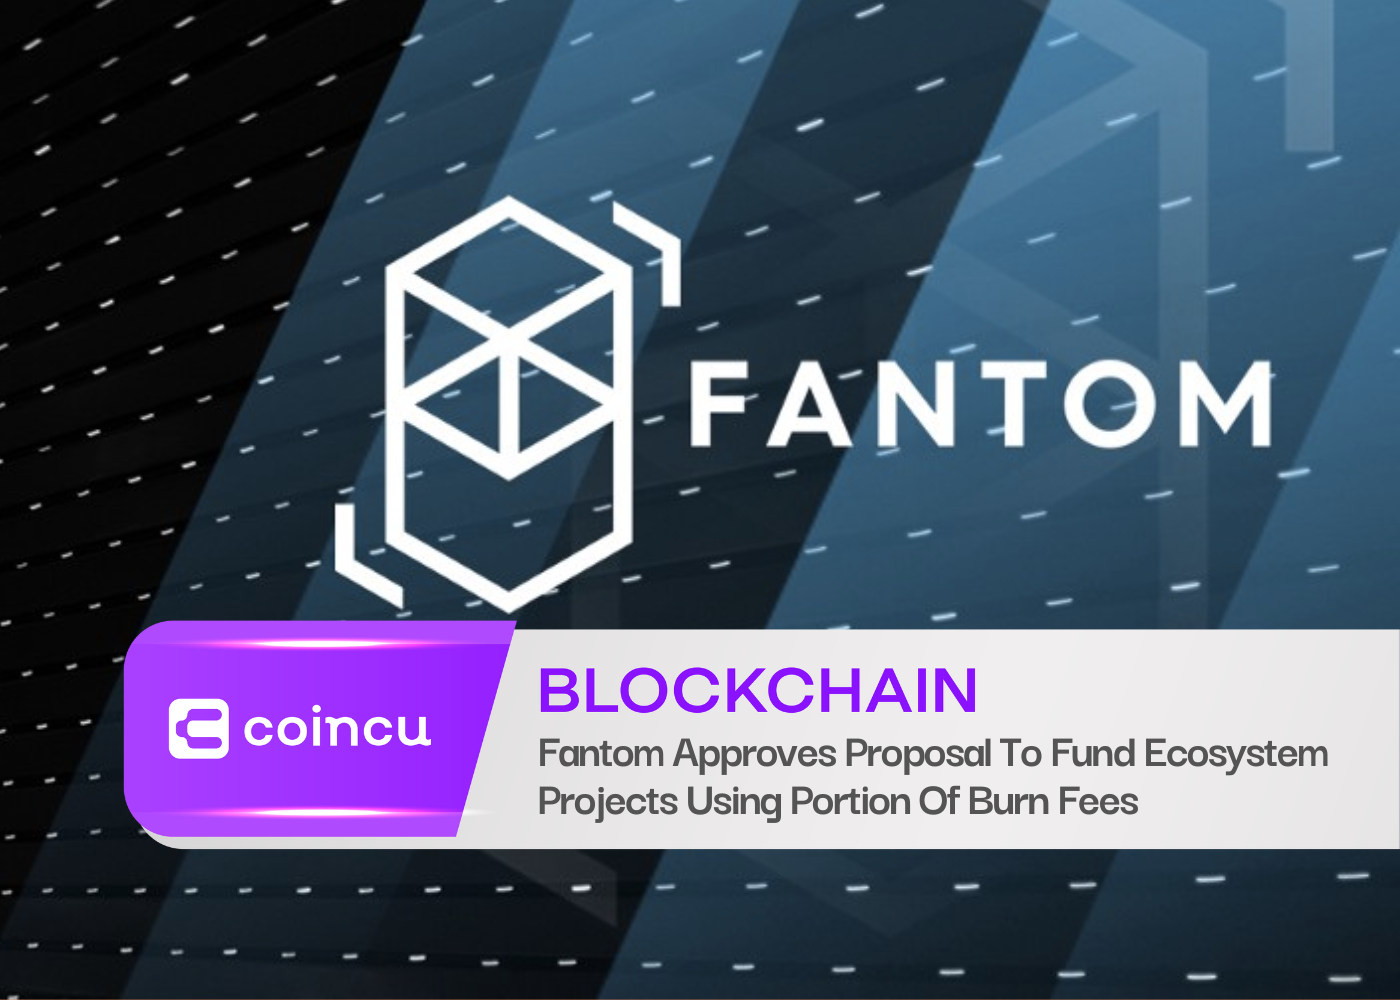 Fantom Approves Proposal To Fund Ecosystem Projects Using Portion Of Burn Fees